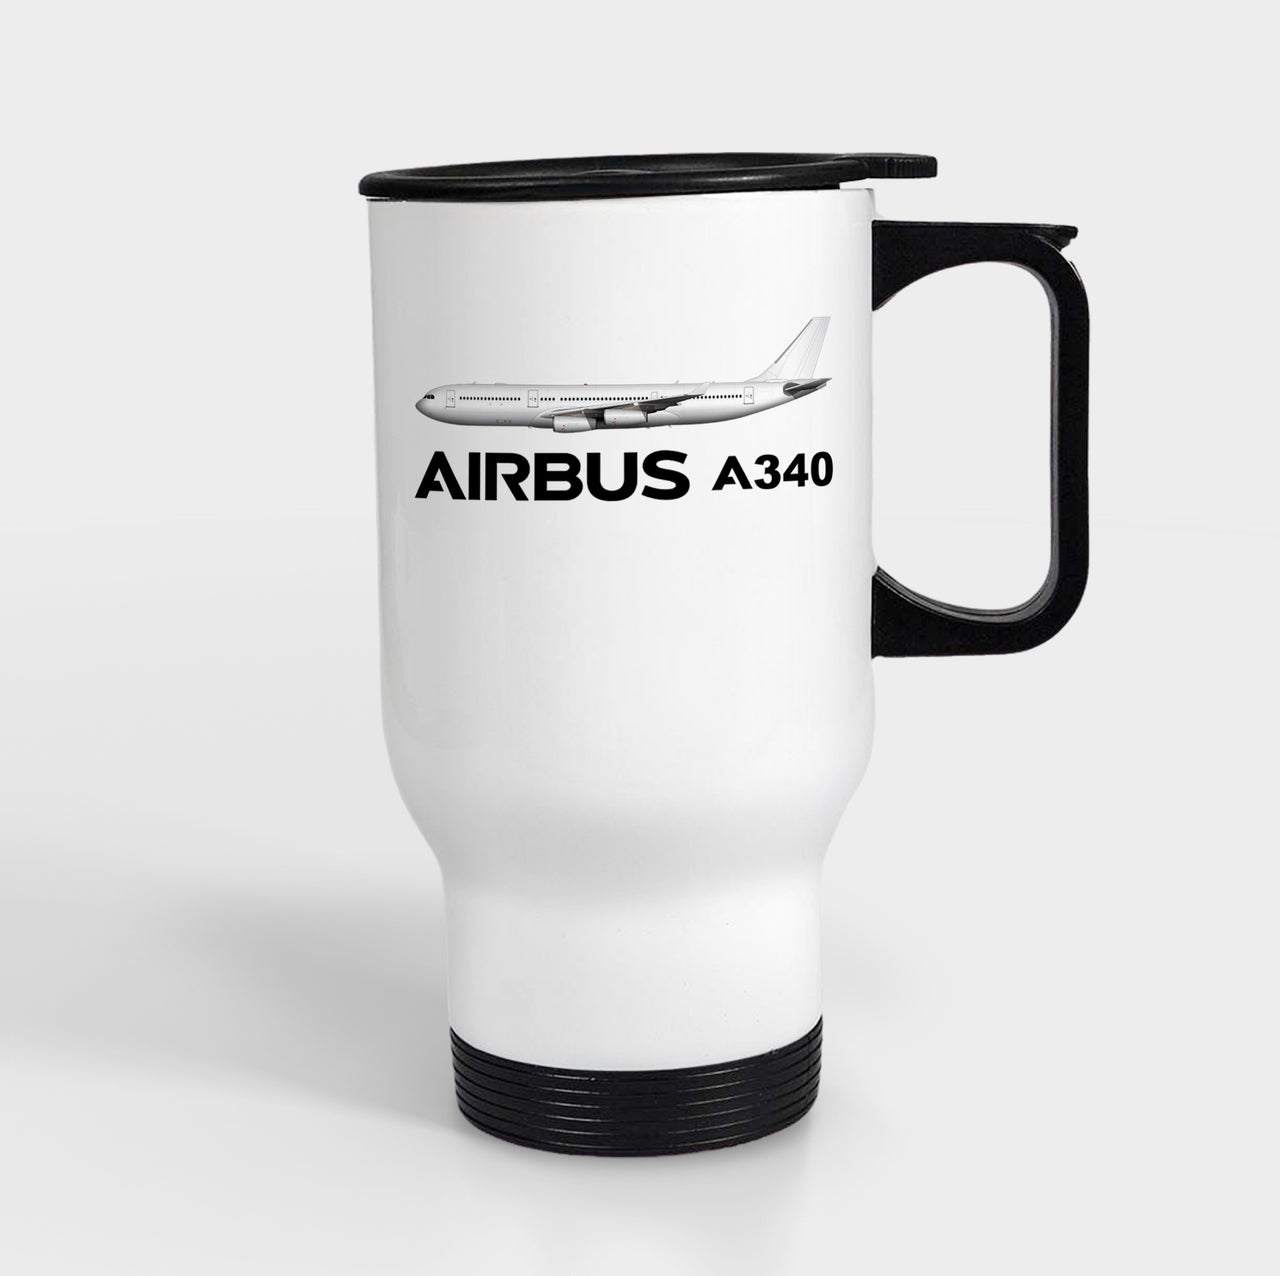 The Airbus A340 Designed Travel Mugs (With Holder)